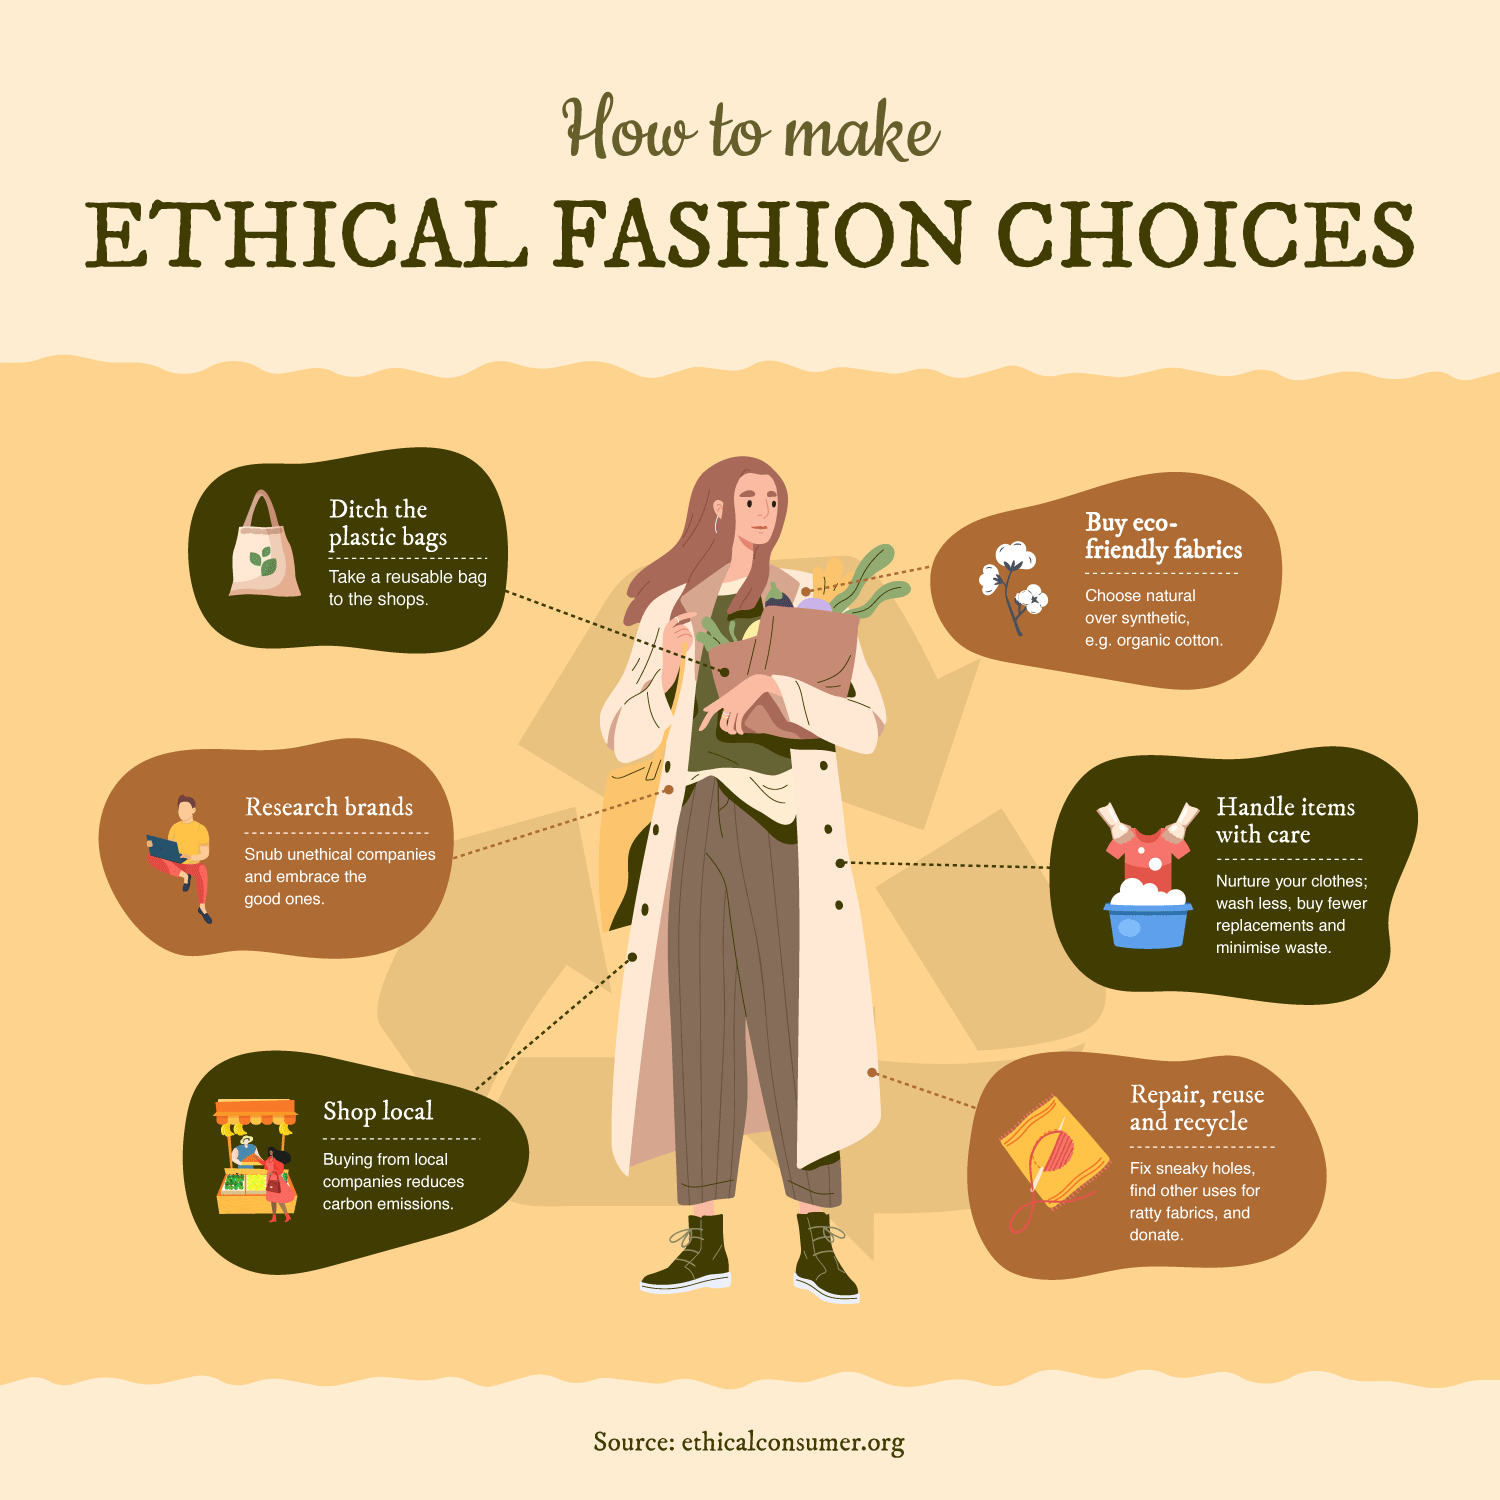 How to make ethical fashion choices